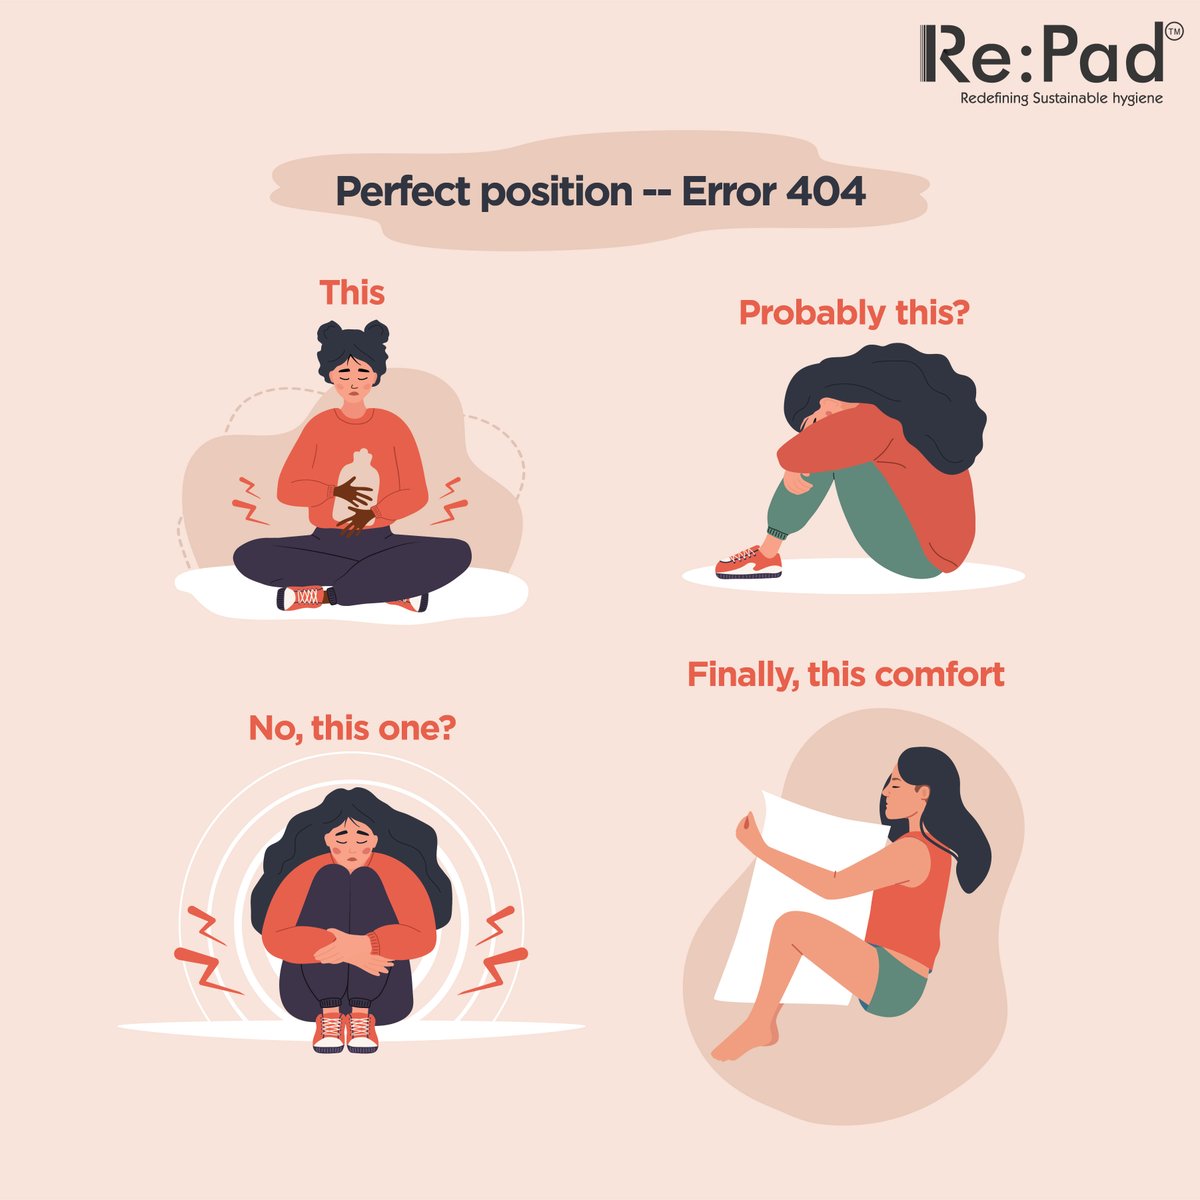 That struggle of finding the perfect period position! 

#Repad #Periods #Reusablepads #Pantyliners #Menstrualcups #Mensturation #Periodstruggles #Periodstories #sanitary #periodtalk #periodpositivity #perioddrama #periodsarenormal #Thursday